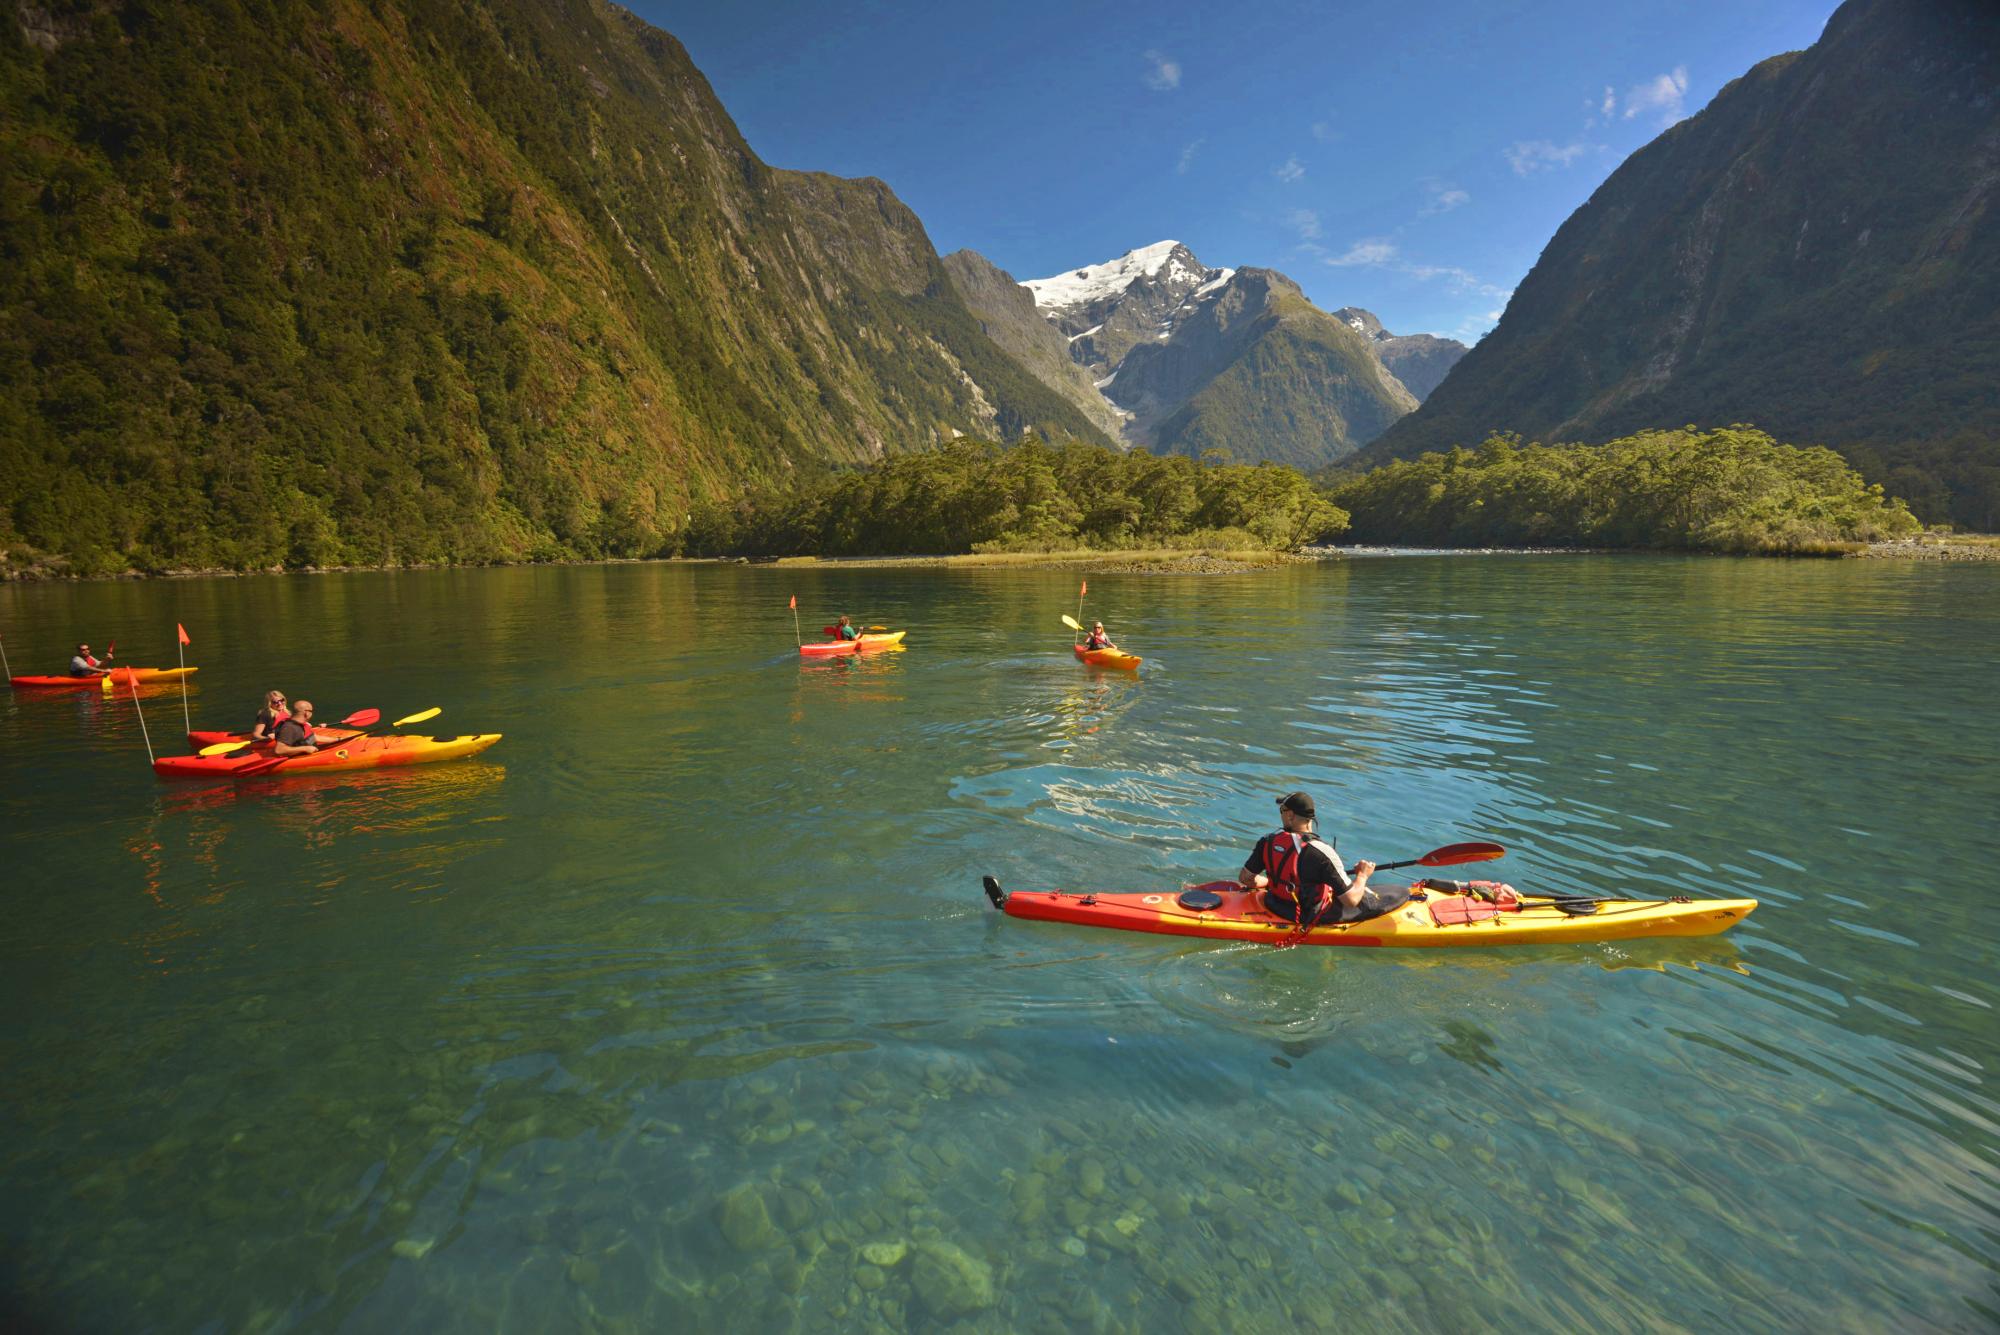 A group of people kayaking in Milford Sound with mountains in the background.